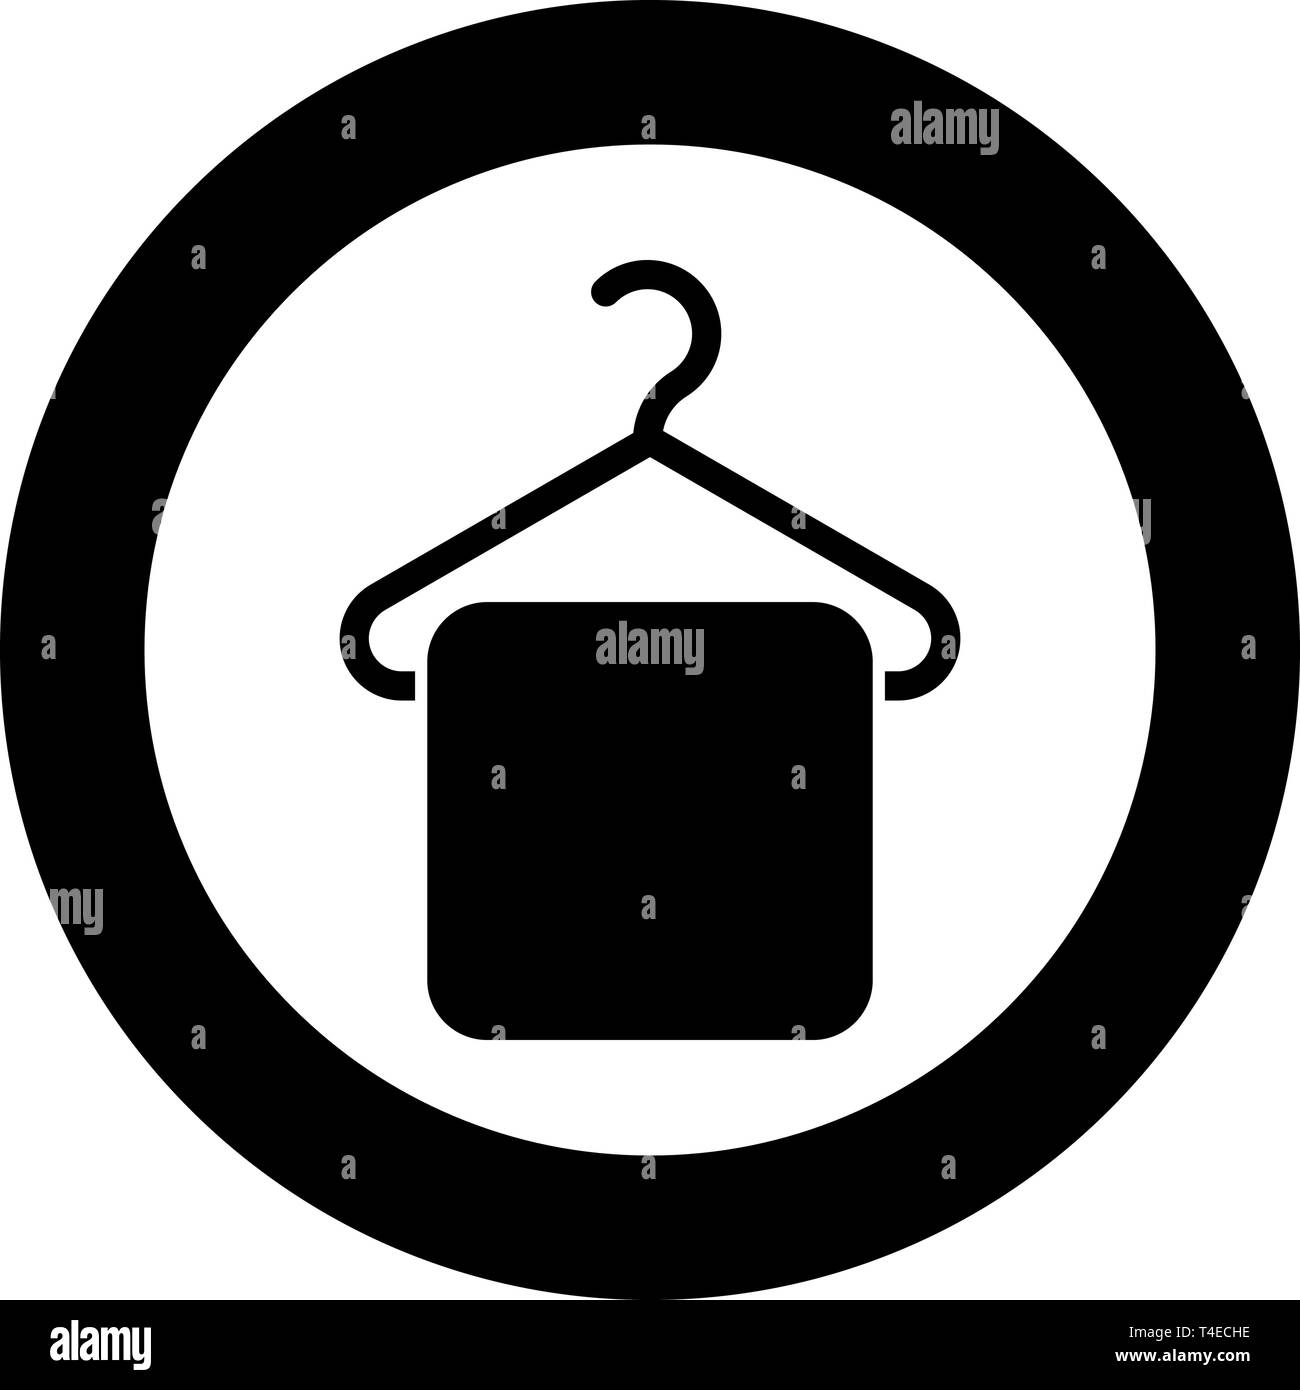 Towel on hanger Hanger towel Clothes hanger with hanging towel icon in circle round black color vector illustration flat style simple image Stock Vector